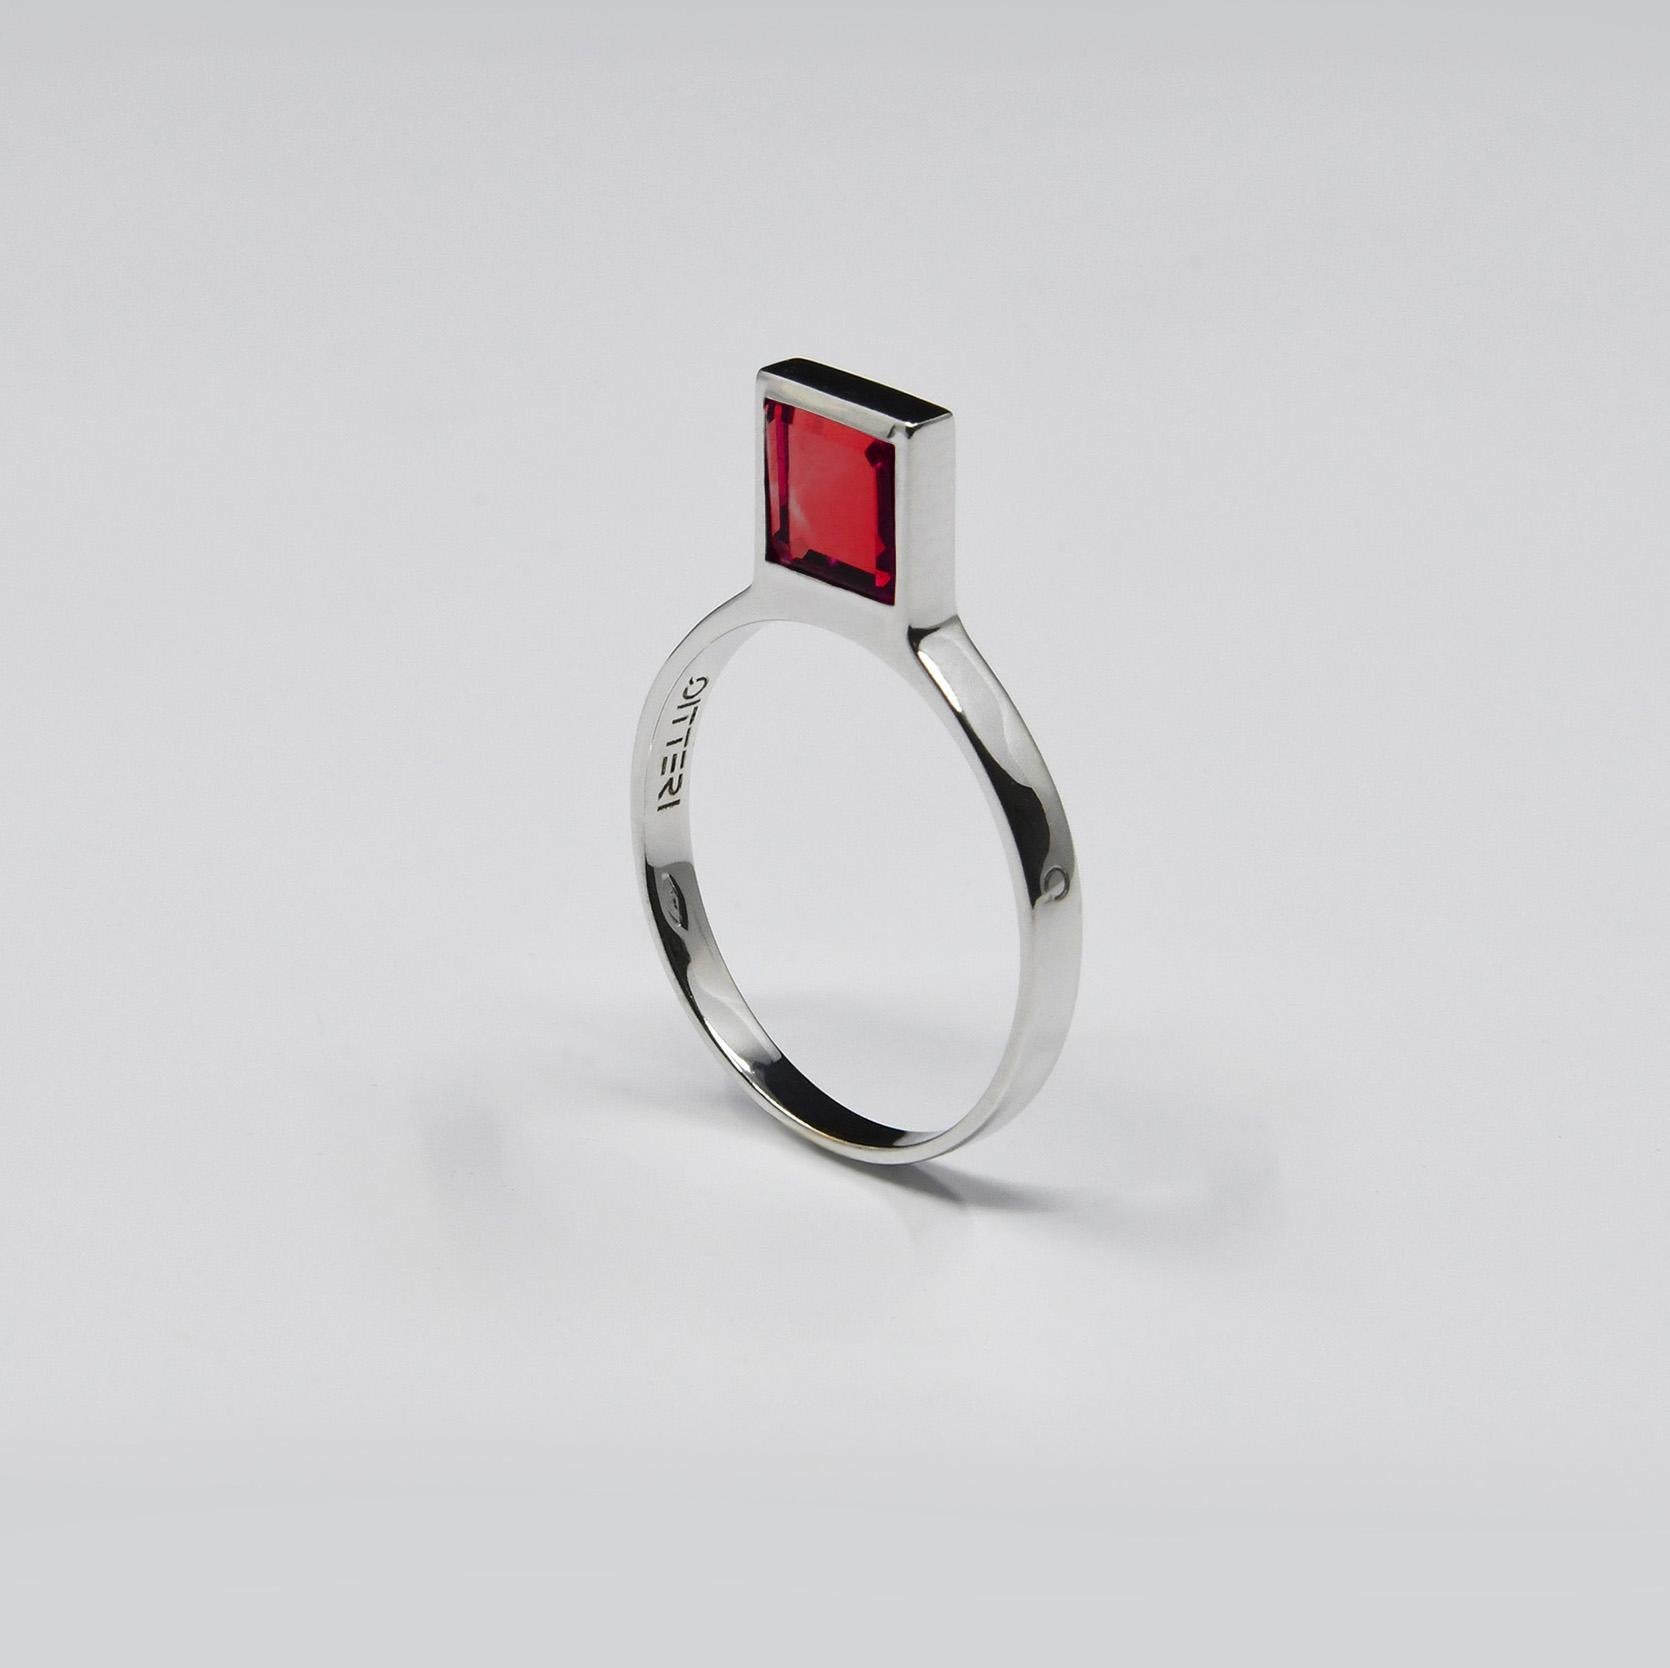 This innovative and contemporary ring, with its unique silhouette, was conceived by designer Michel Tortel for QITTERI. It features a major innovation: a new gem cut in a minimalist square shape in a vertical position. In this model, the garnet is